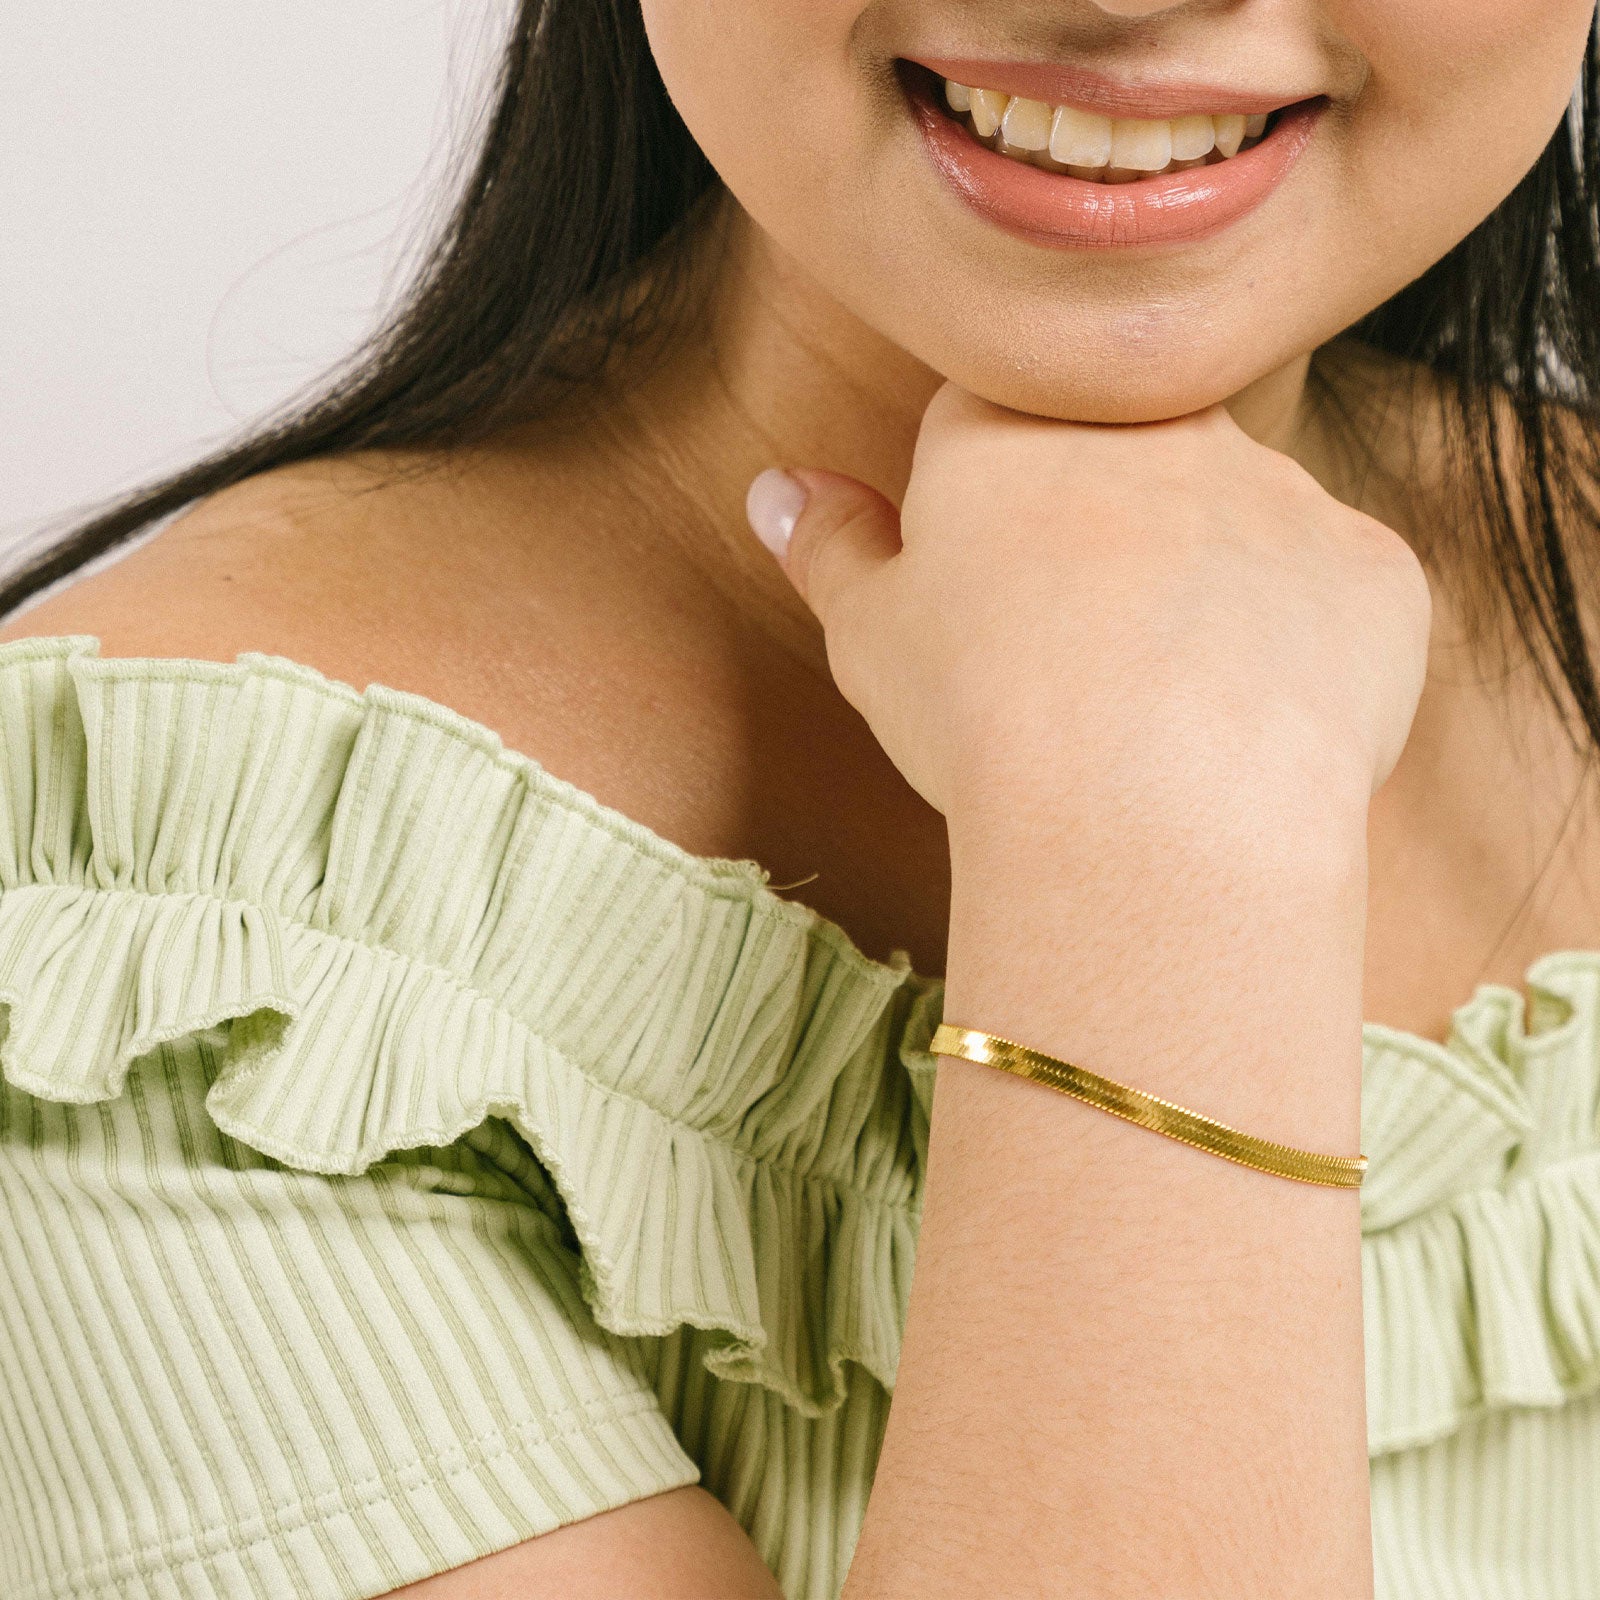 A model wearing the Herringbone Chain Bracelet is crafted with 18K Gold Plated on 316L Stainless Steel, making it non-tarnish, water resistant, nickel-free, and hypoallergenic. It has an adjustable feature, but it is sold as a single bracelet.